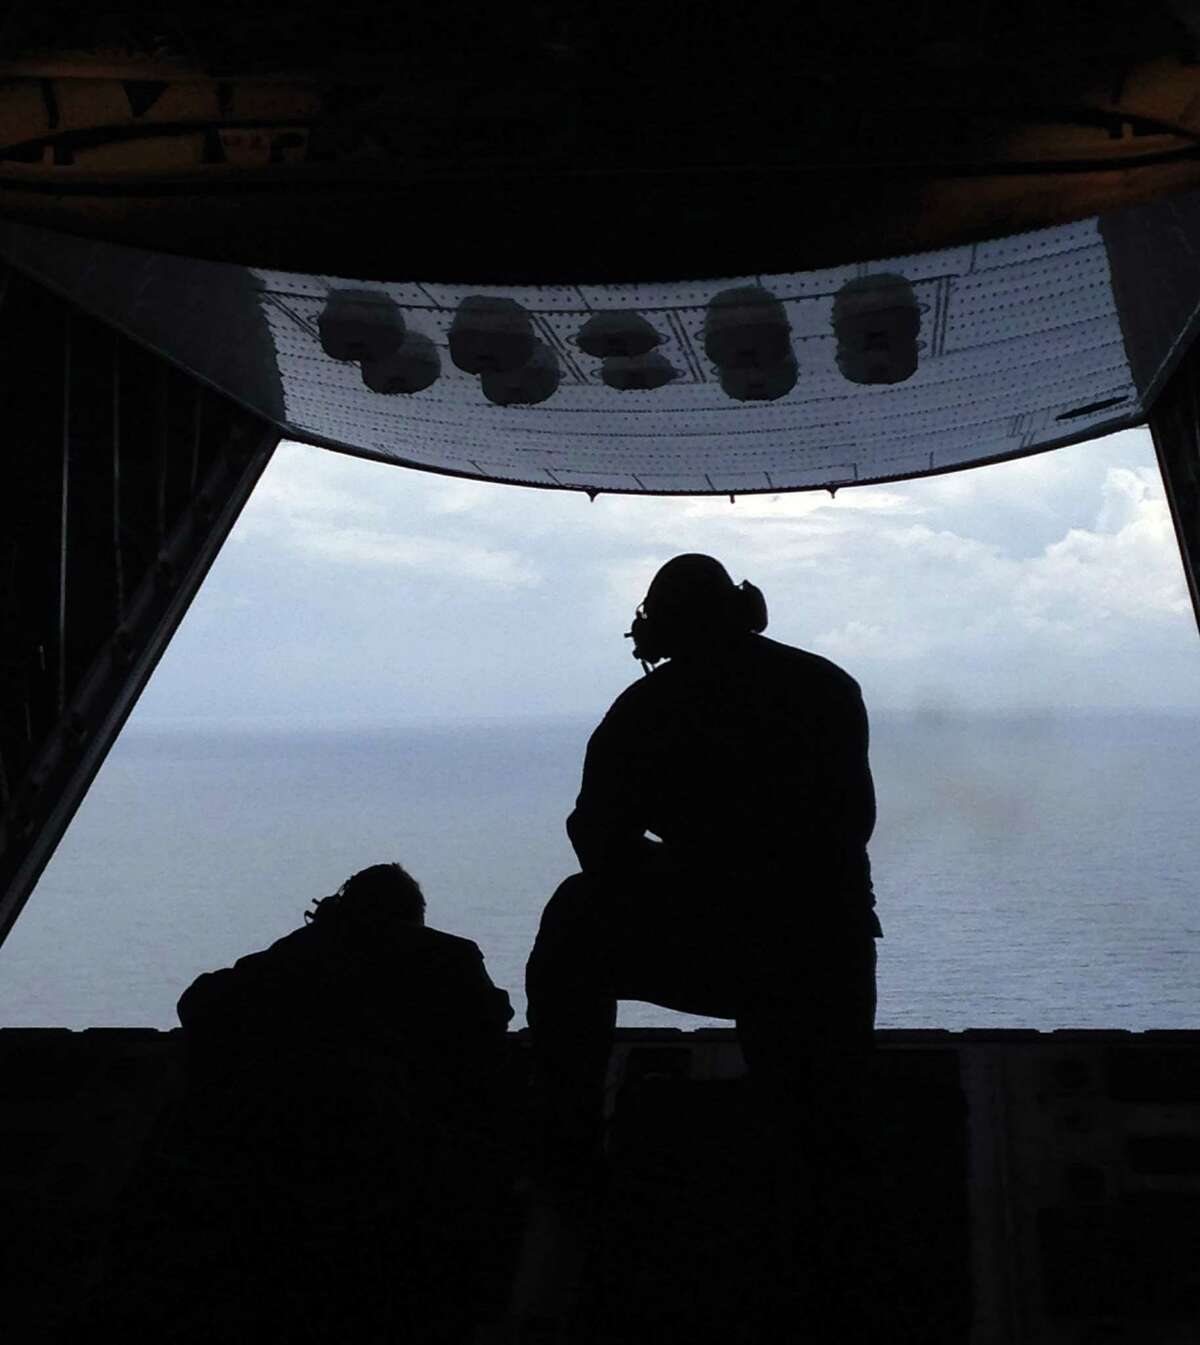 Petty Officer 3rd Class Charles Camarda, left, and Petty Officer 3rd Class Nate Matthews scour the Atlantic Ocean off the coast of Savannah, Ga., Tuesday, looking for two missing teenage boaters. Camarda and Matthews are crew members from Air Station Clearwater, Florida.